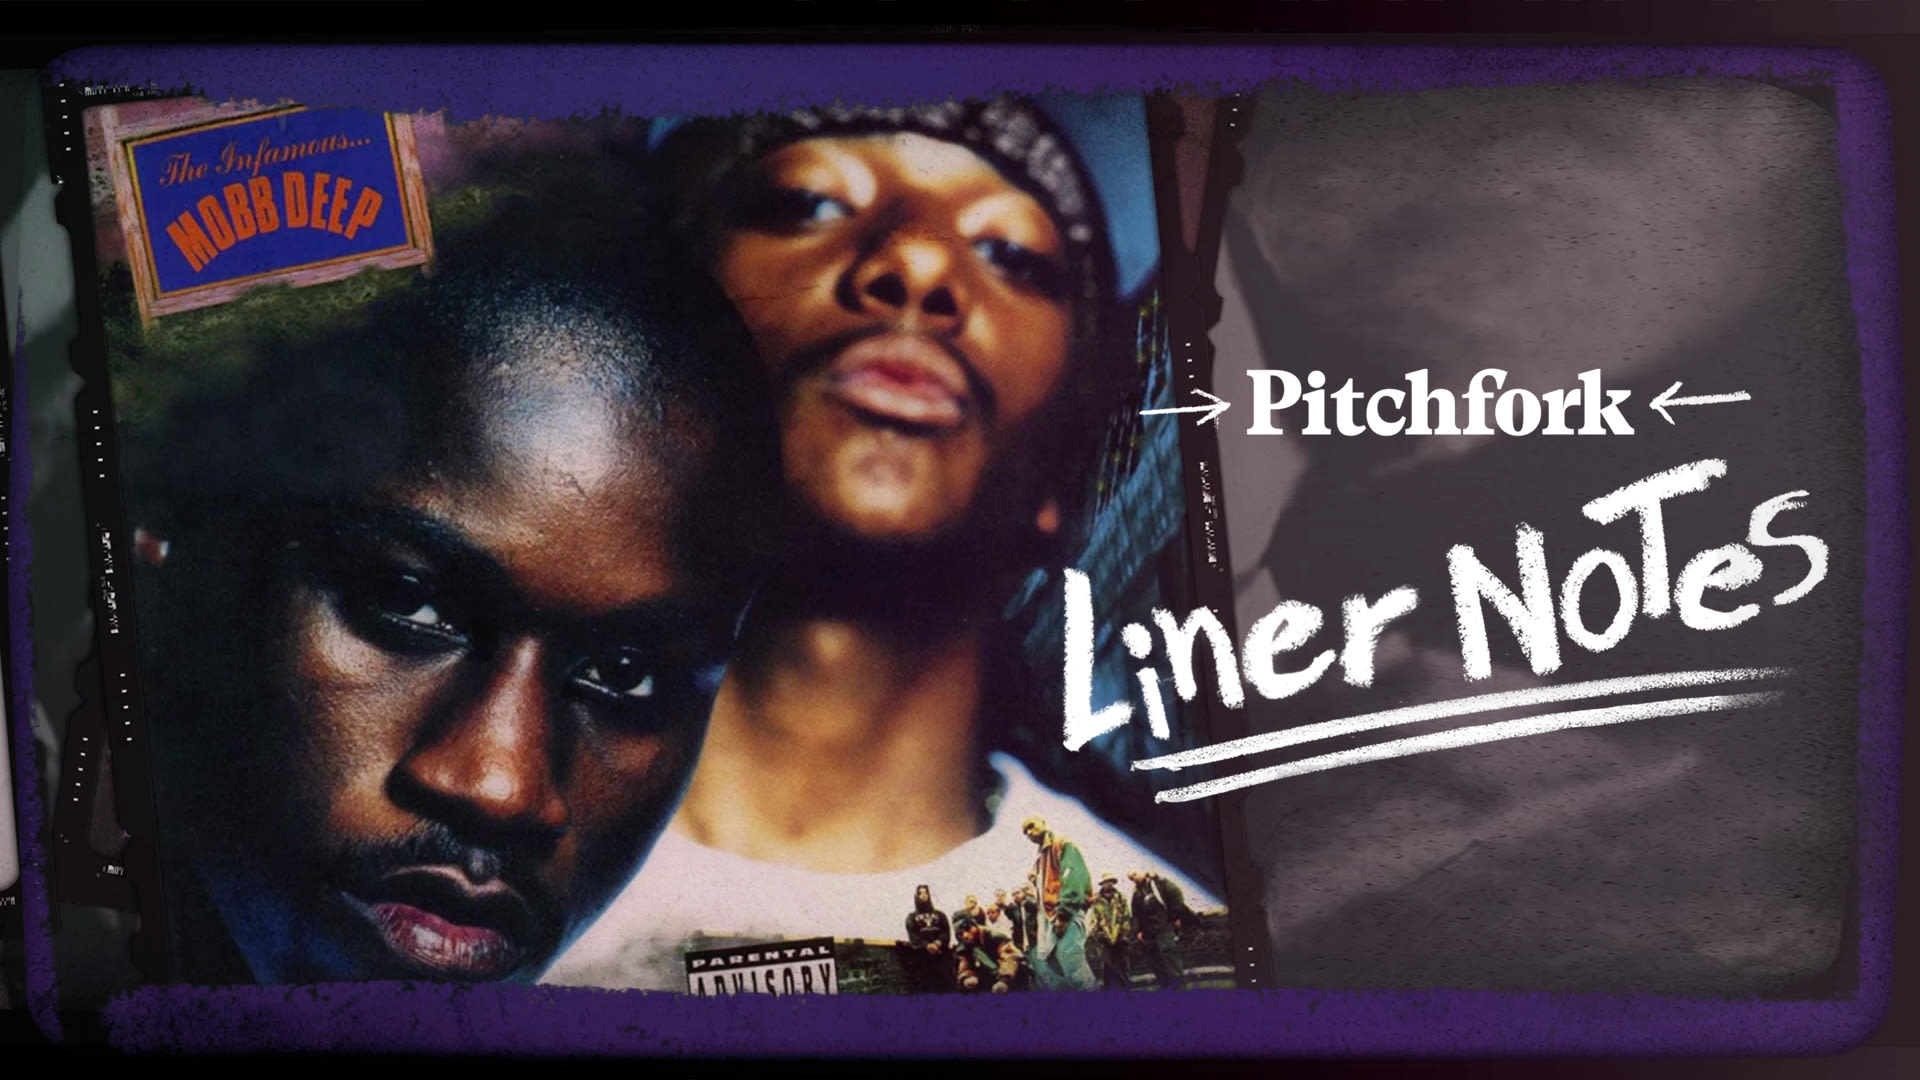 Watch Mobb Deep's The Infamous in 5 Minutes | Pitchfork Docs